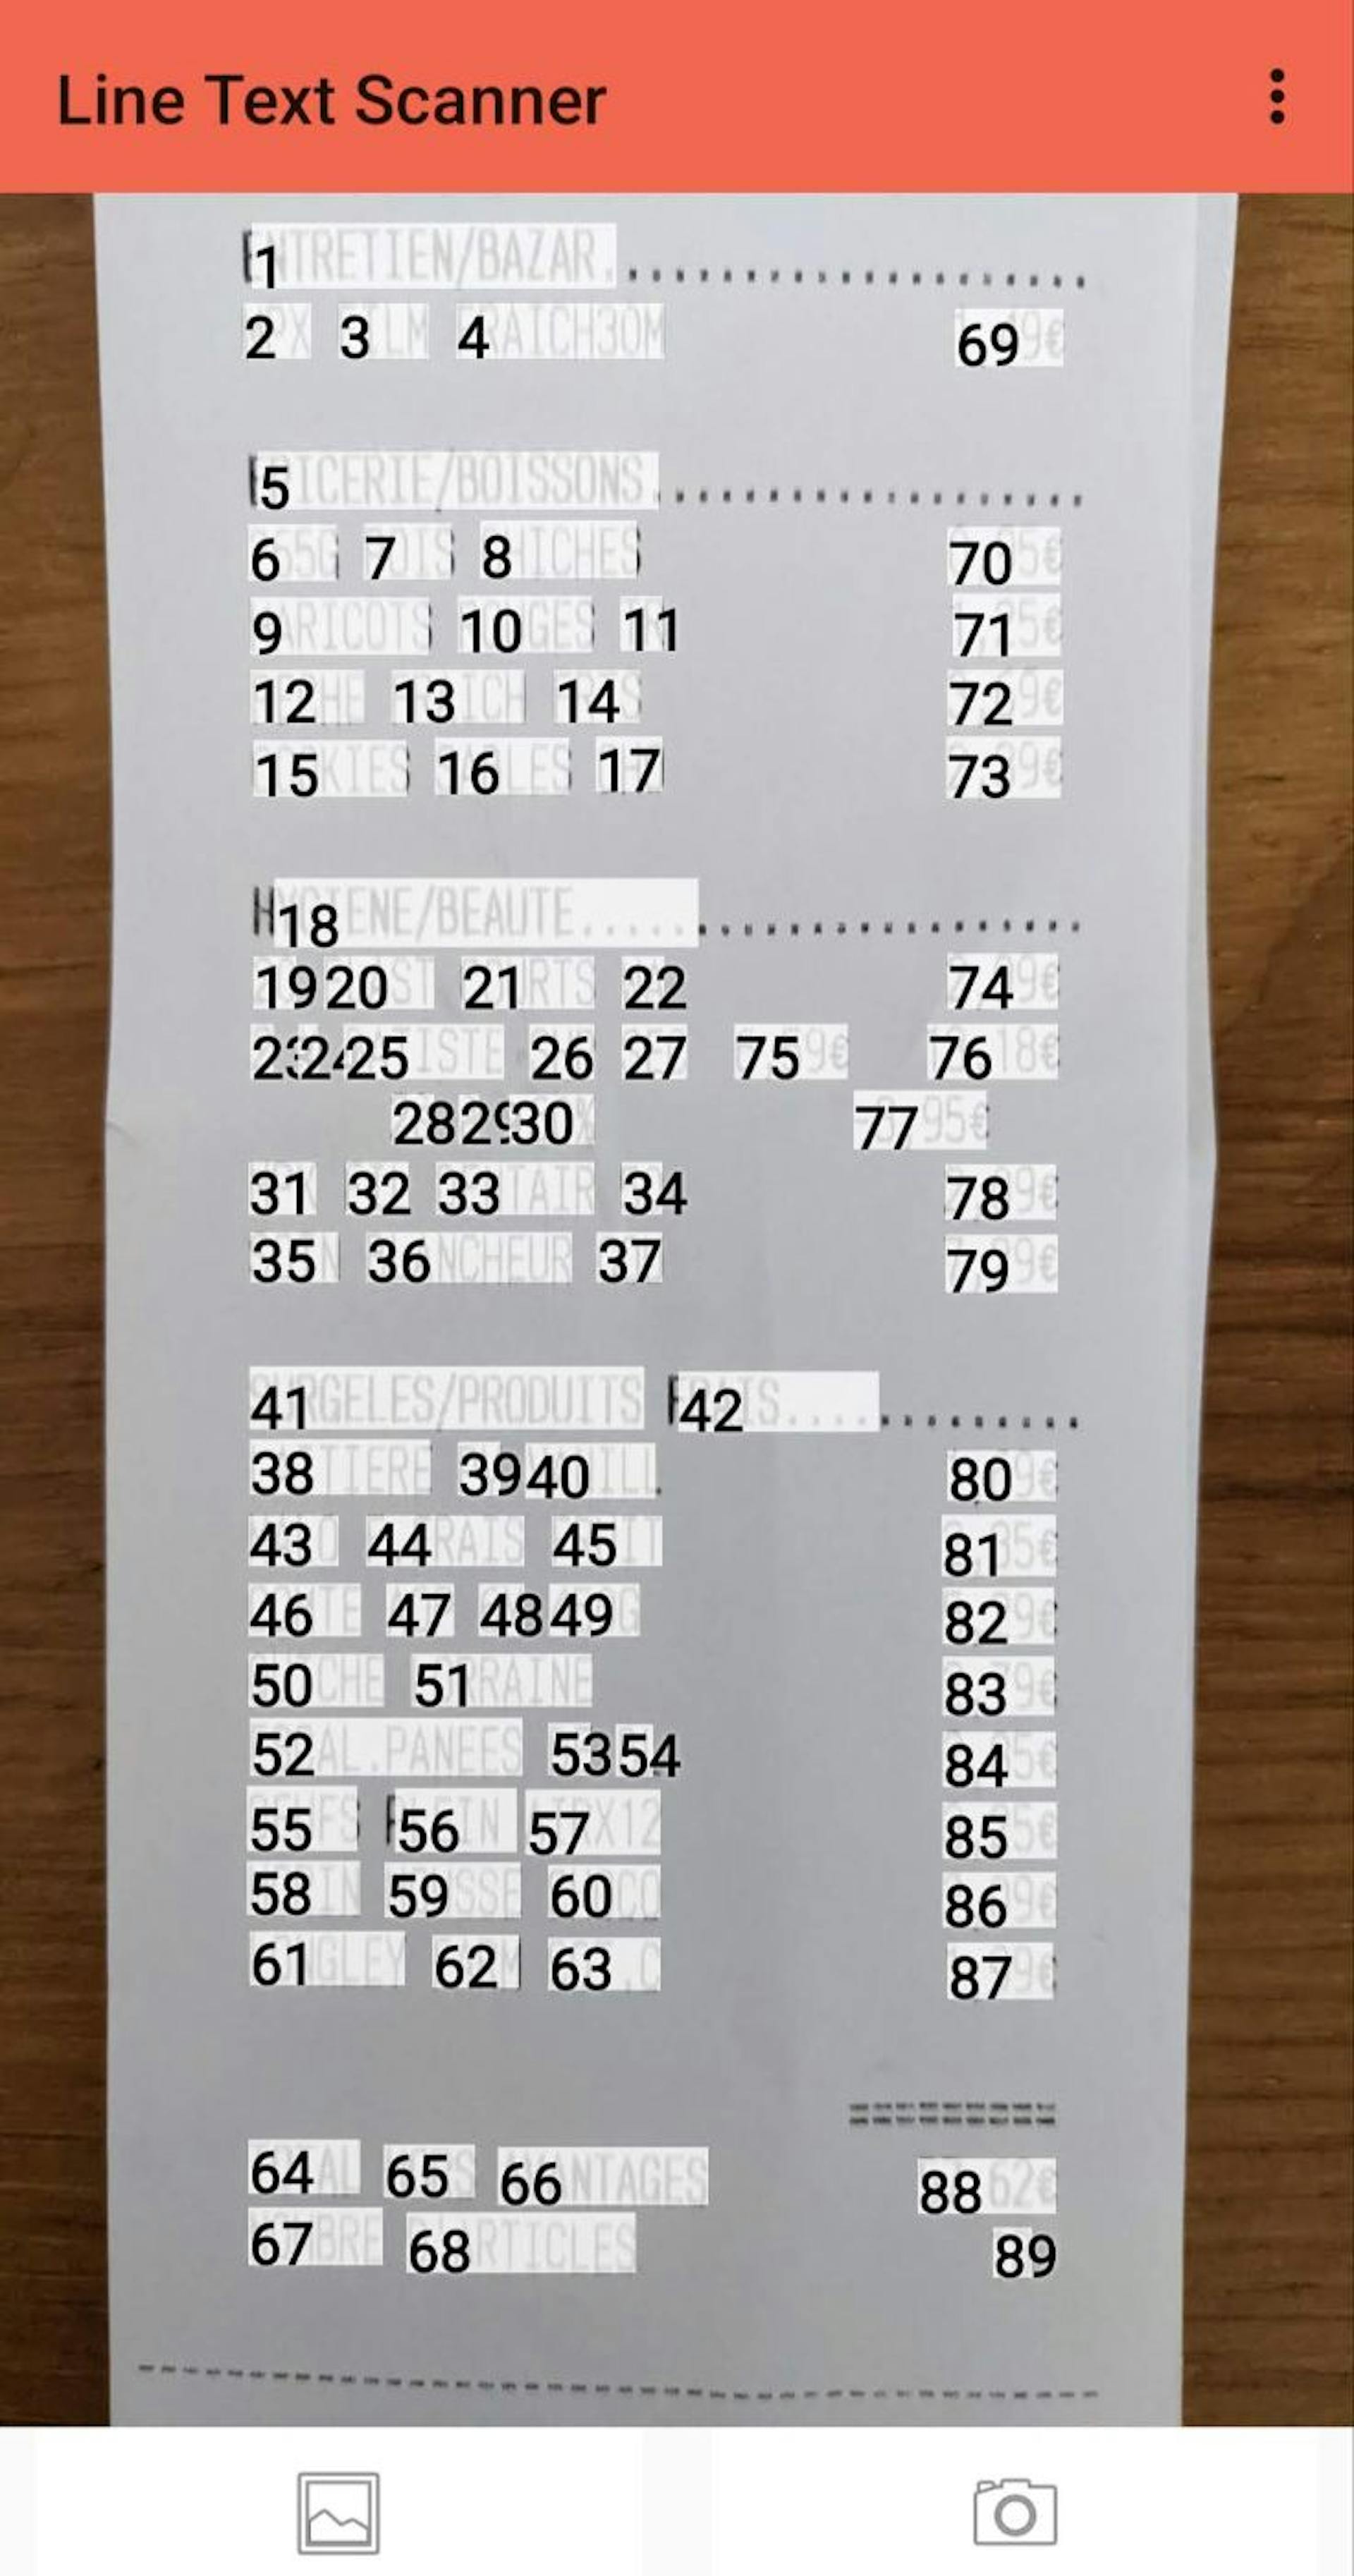 There are 89 text elements in this receipt